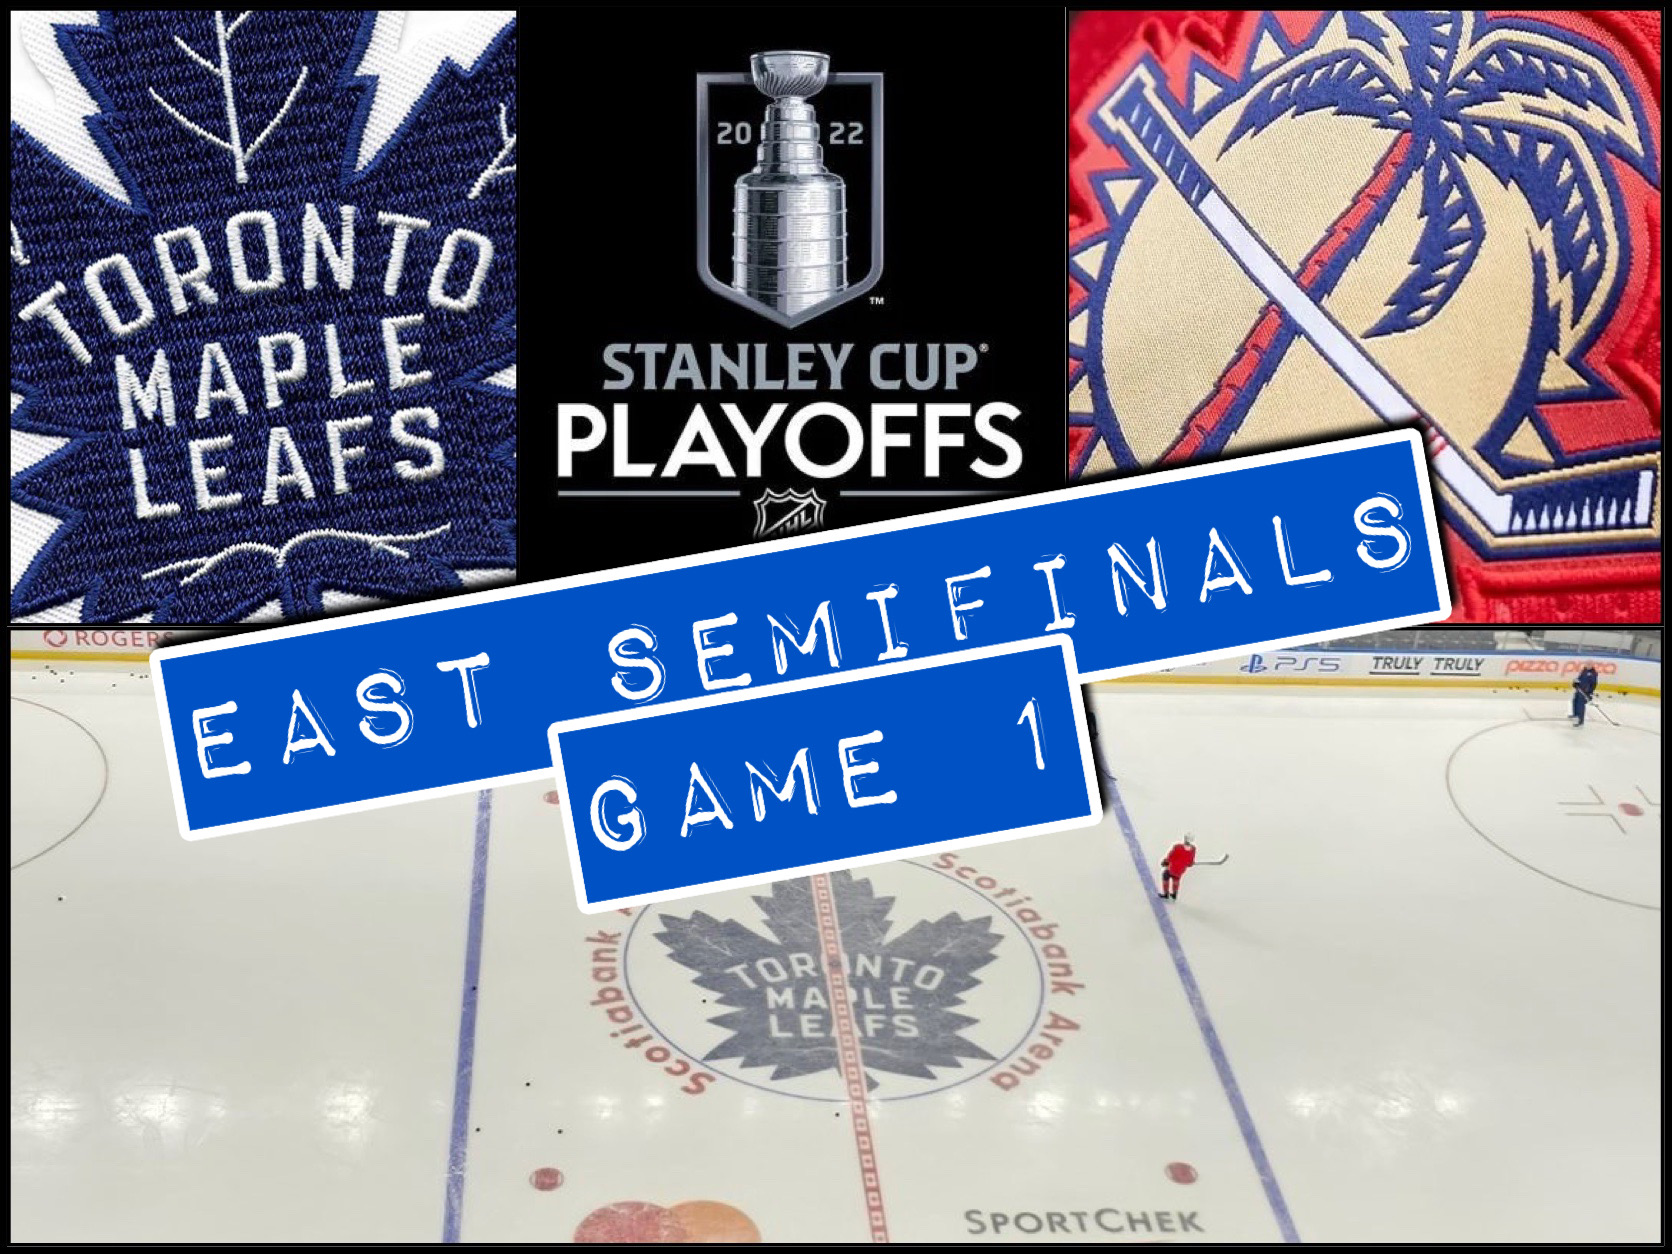 East Semis, Game 1 Florida Panthers 4, Toronto Maple Leafs 2